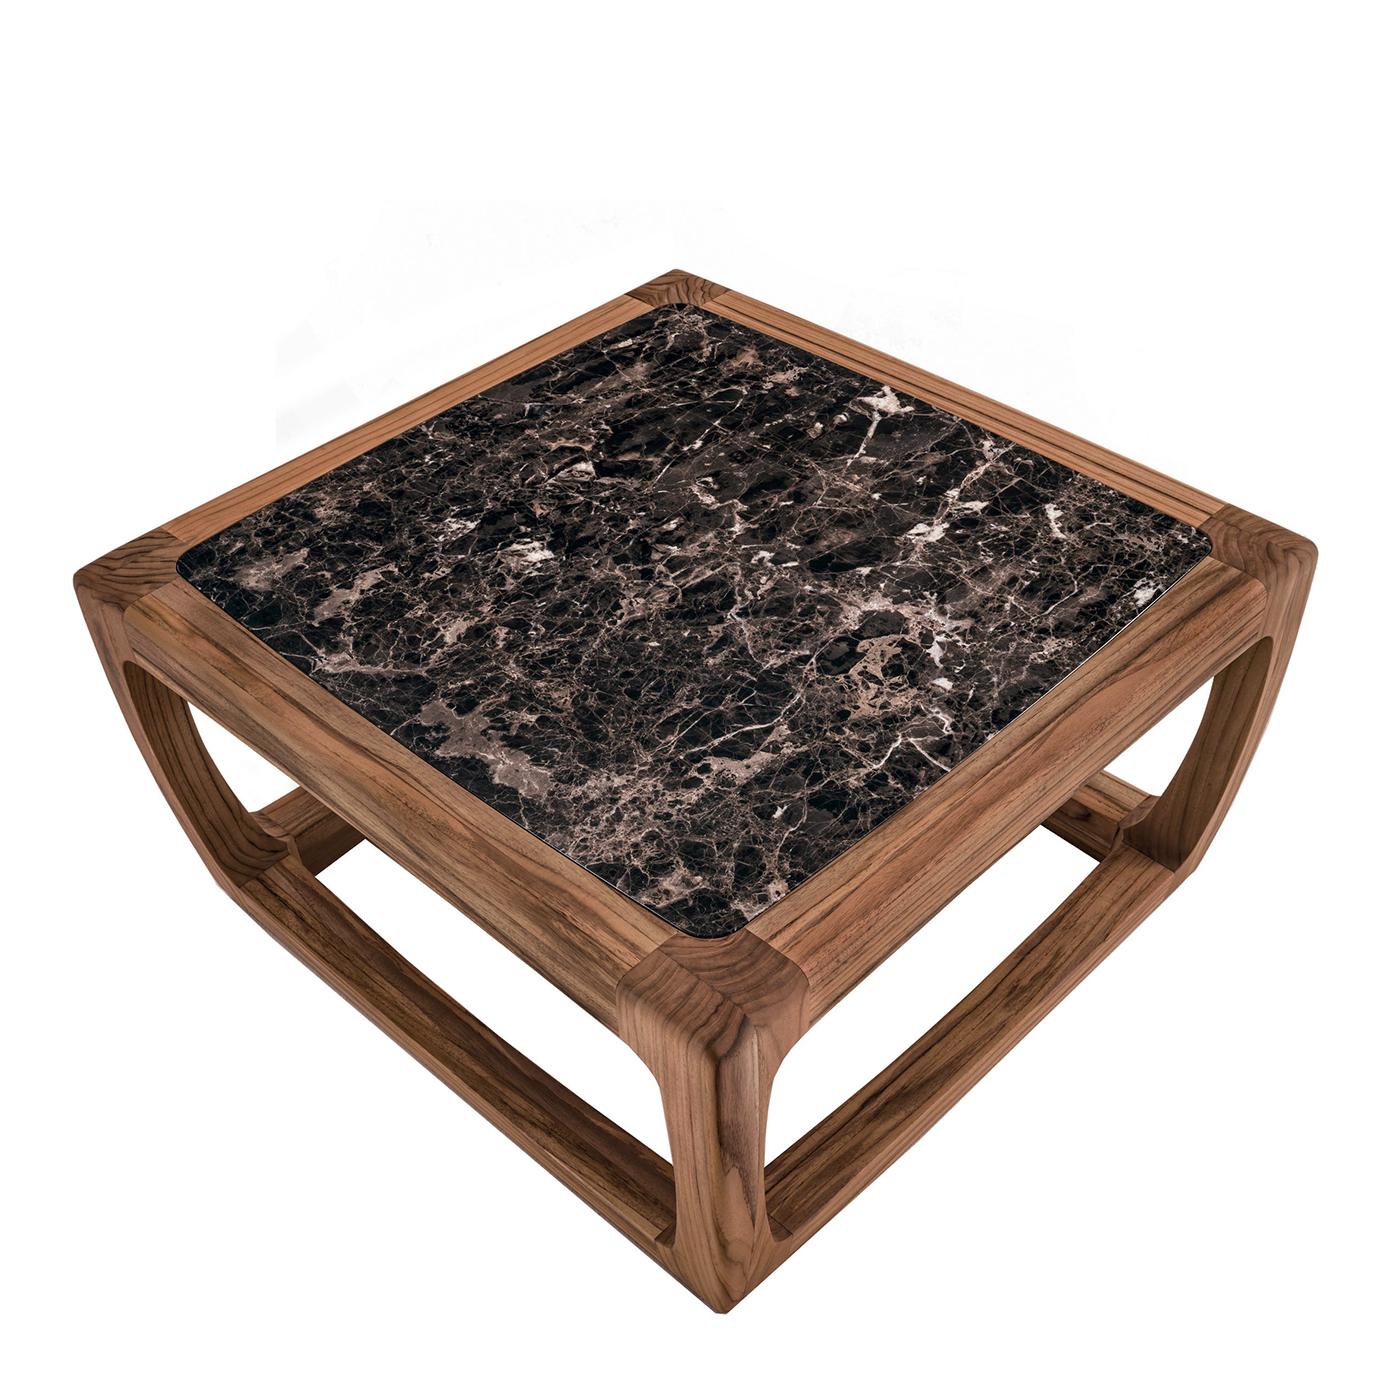 Coffee table trooper walnut with all structure in solid
walnut wood and with dark emperador polished marble
top. Treated wood with wax with natural pine extracts.
Also available in solid oak, on request.